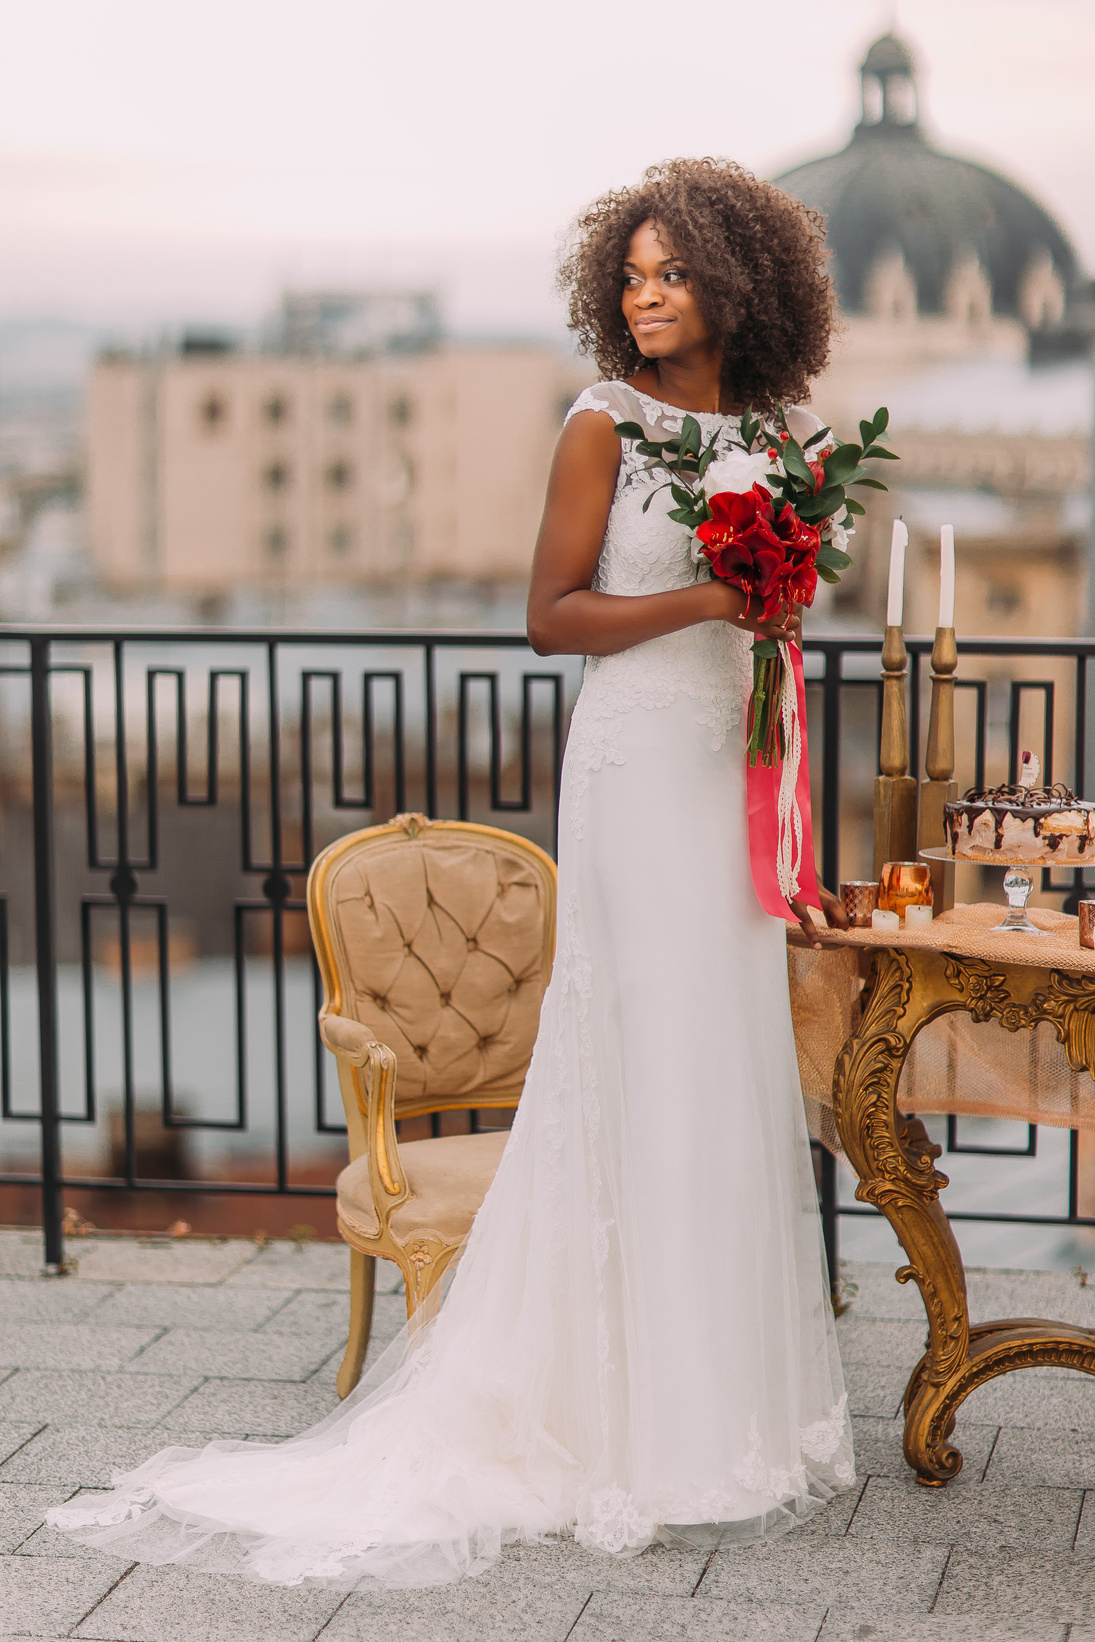 Charming black bride with wedding bouquet in hands standing on